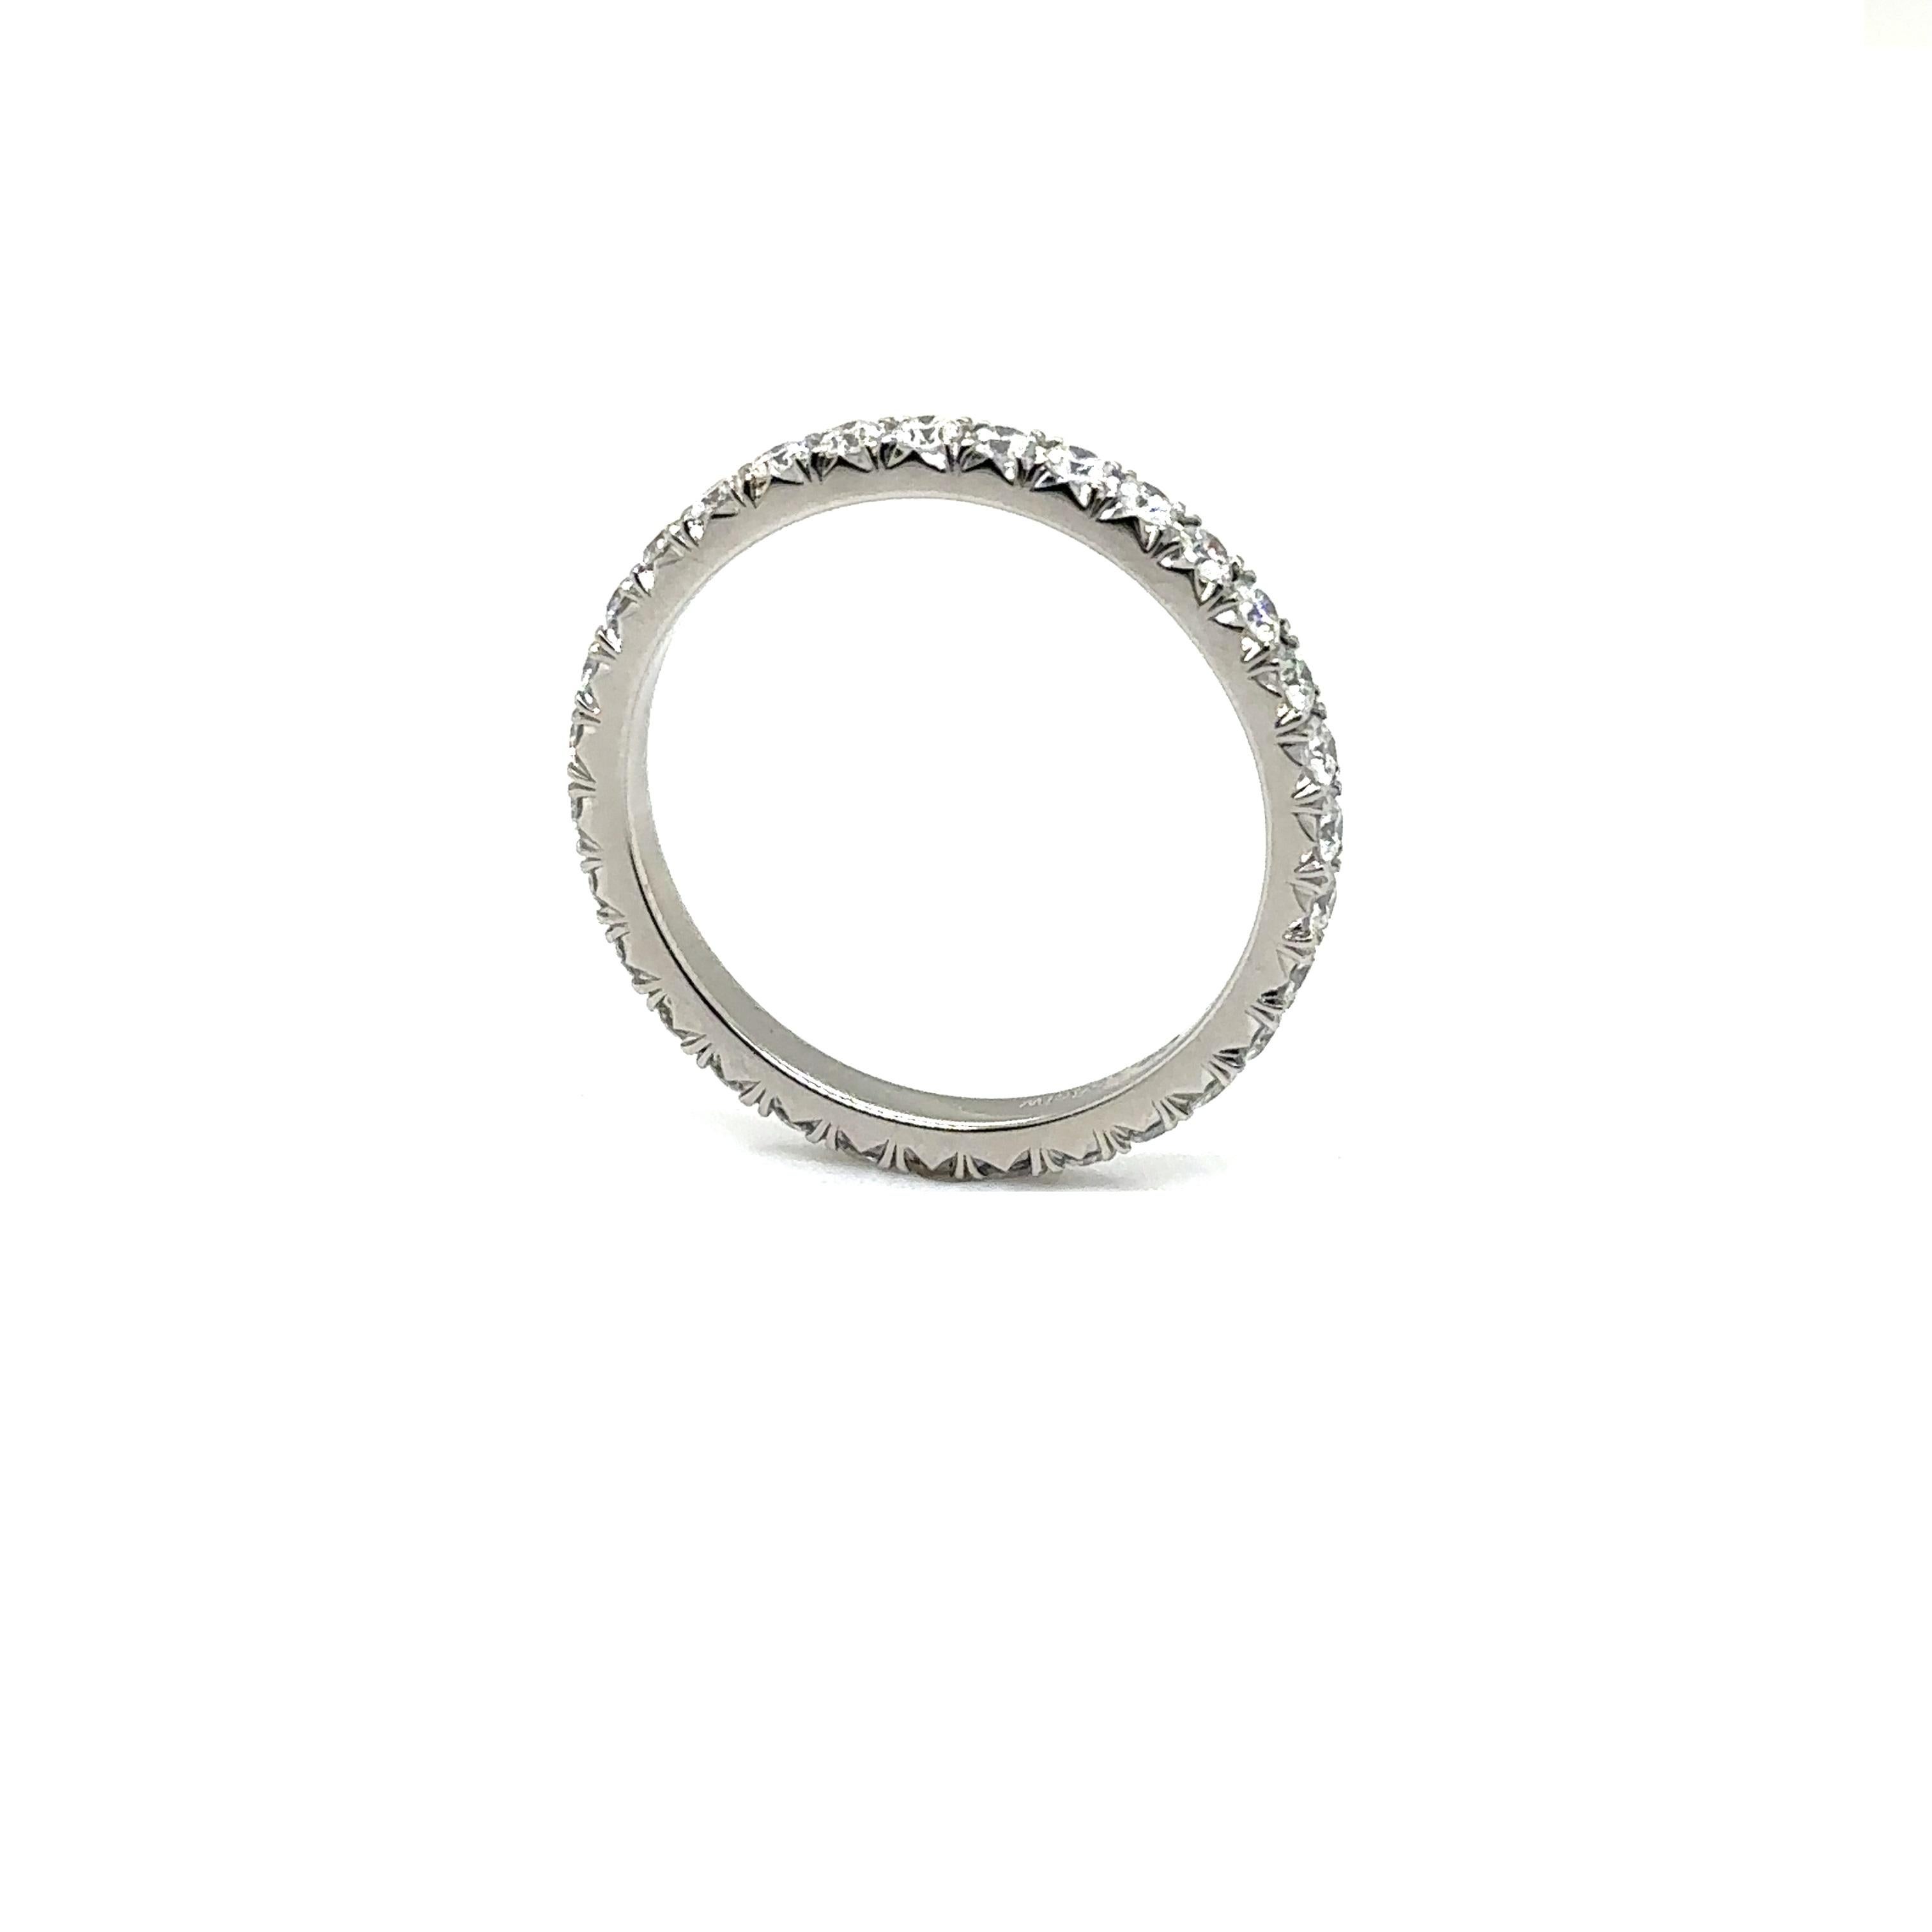 Women's WB31 PLAT - PLATINUM WEDDING BAND with 0.68 CWT DIAMONDS For Sale